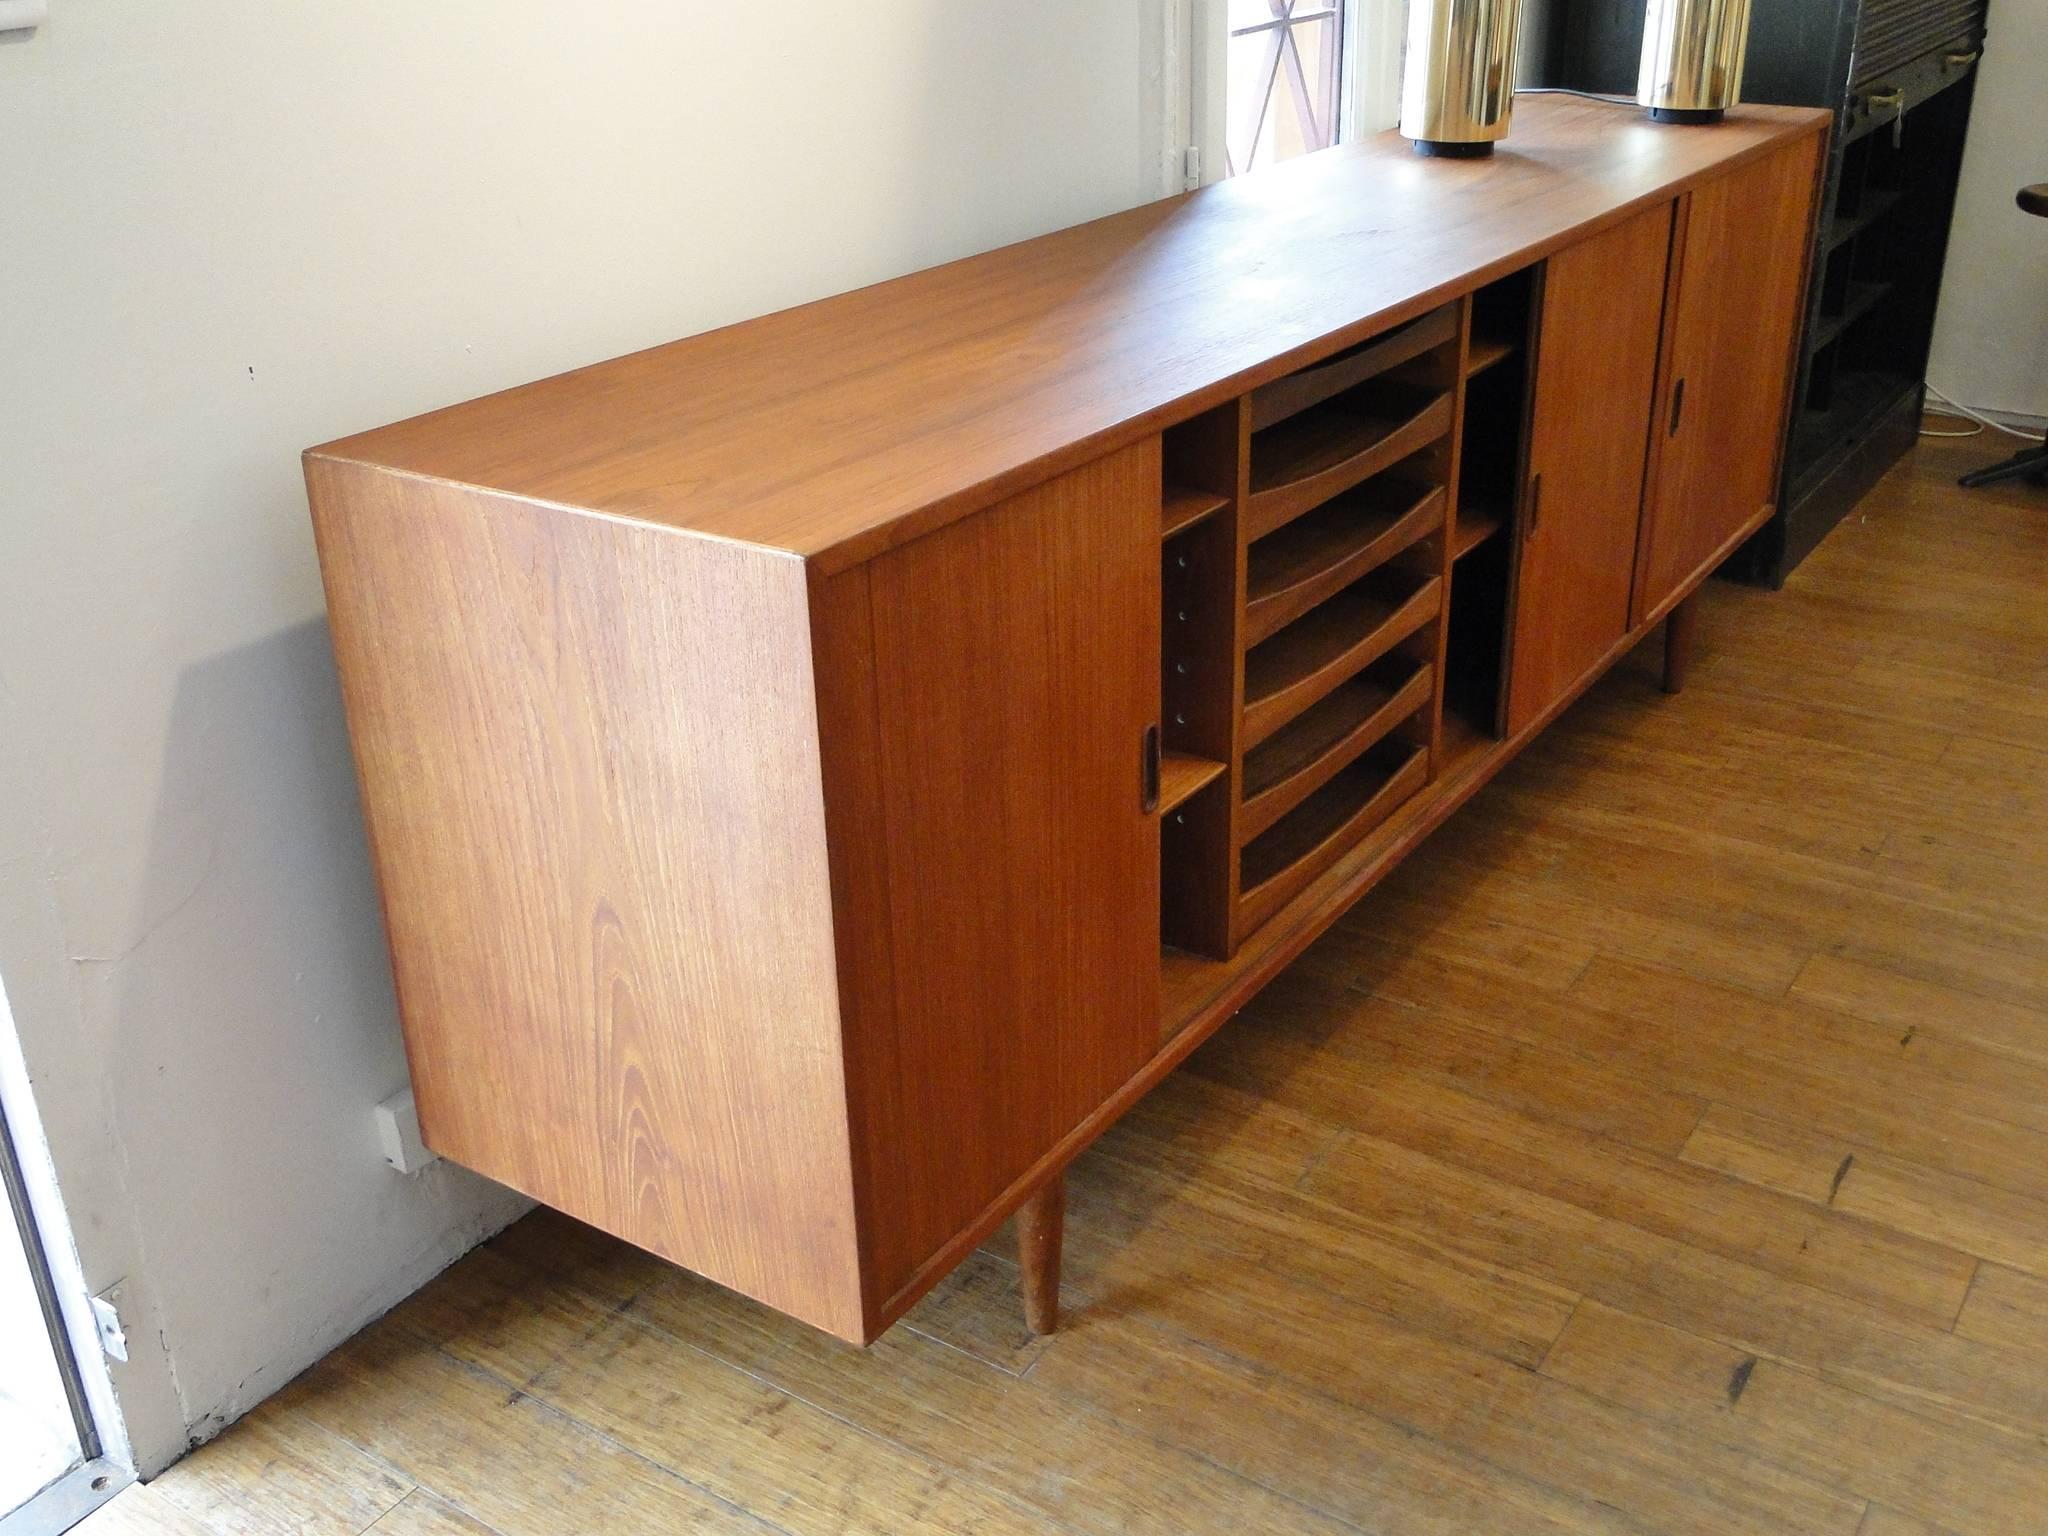 A vintage Danish wooden credenza and sideboard, designed in the Scandinavian Modern style by Arne Vodder for Sibast, with tambour doors, revealing ample shelving space and six pull drawers, with adjacent cabinet with glass shelf. Markings include